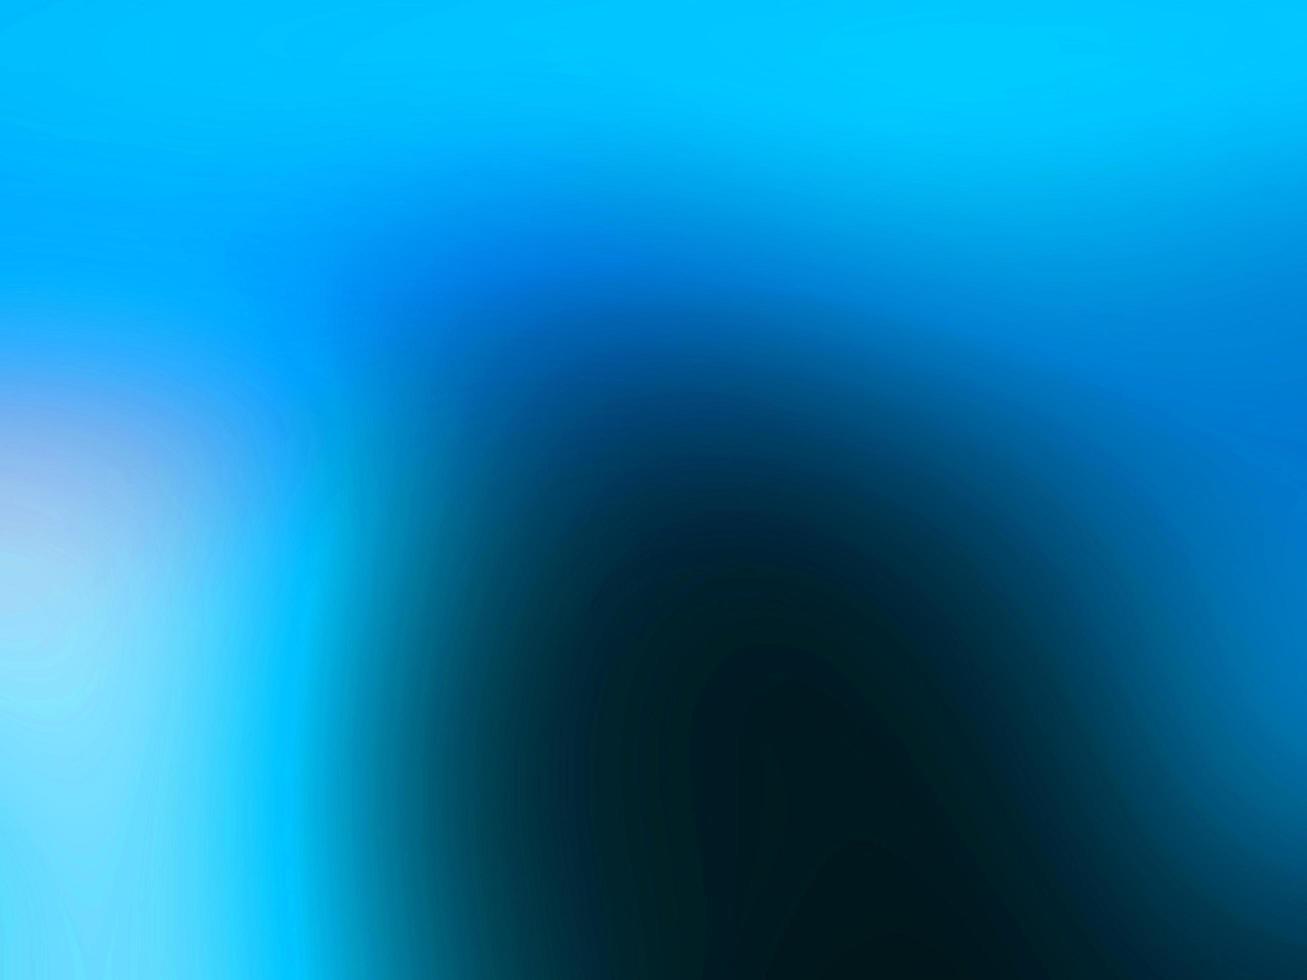 abstract light sea blue colorful subtle blurred beautiful soft bright gradient texture on blue. photo